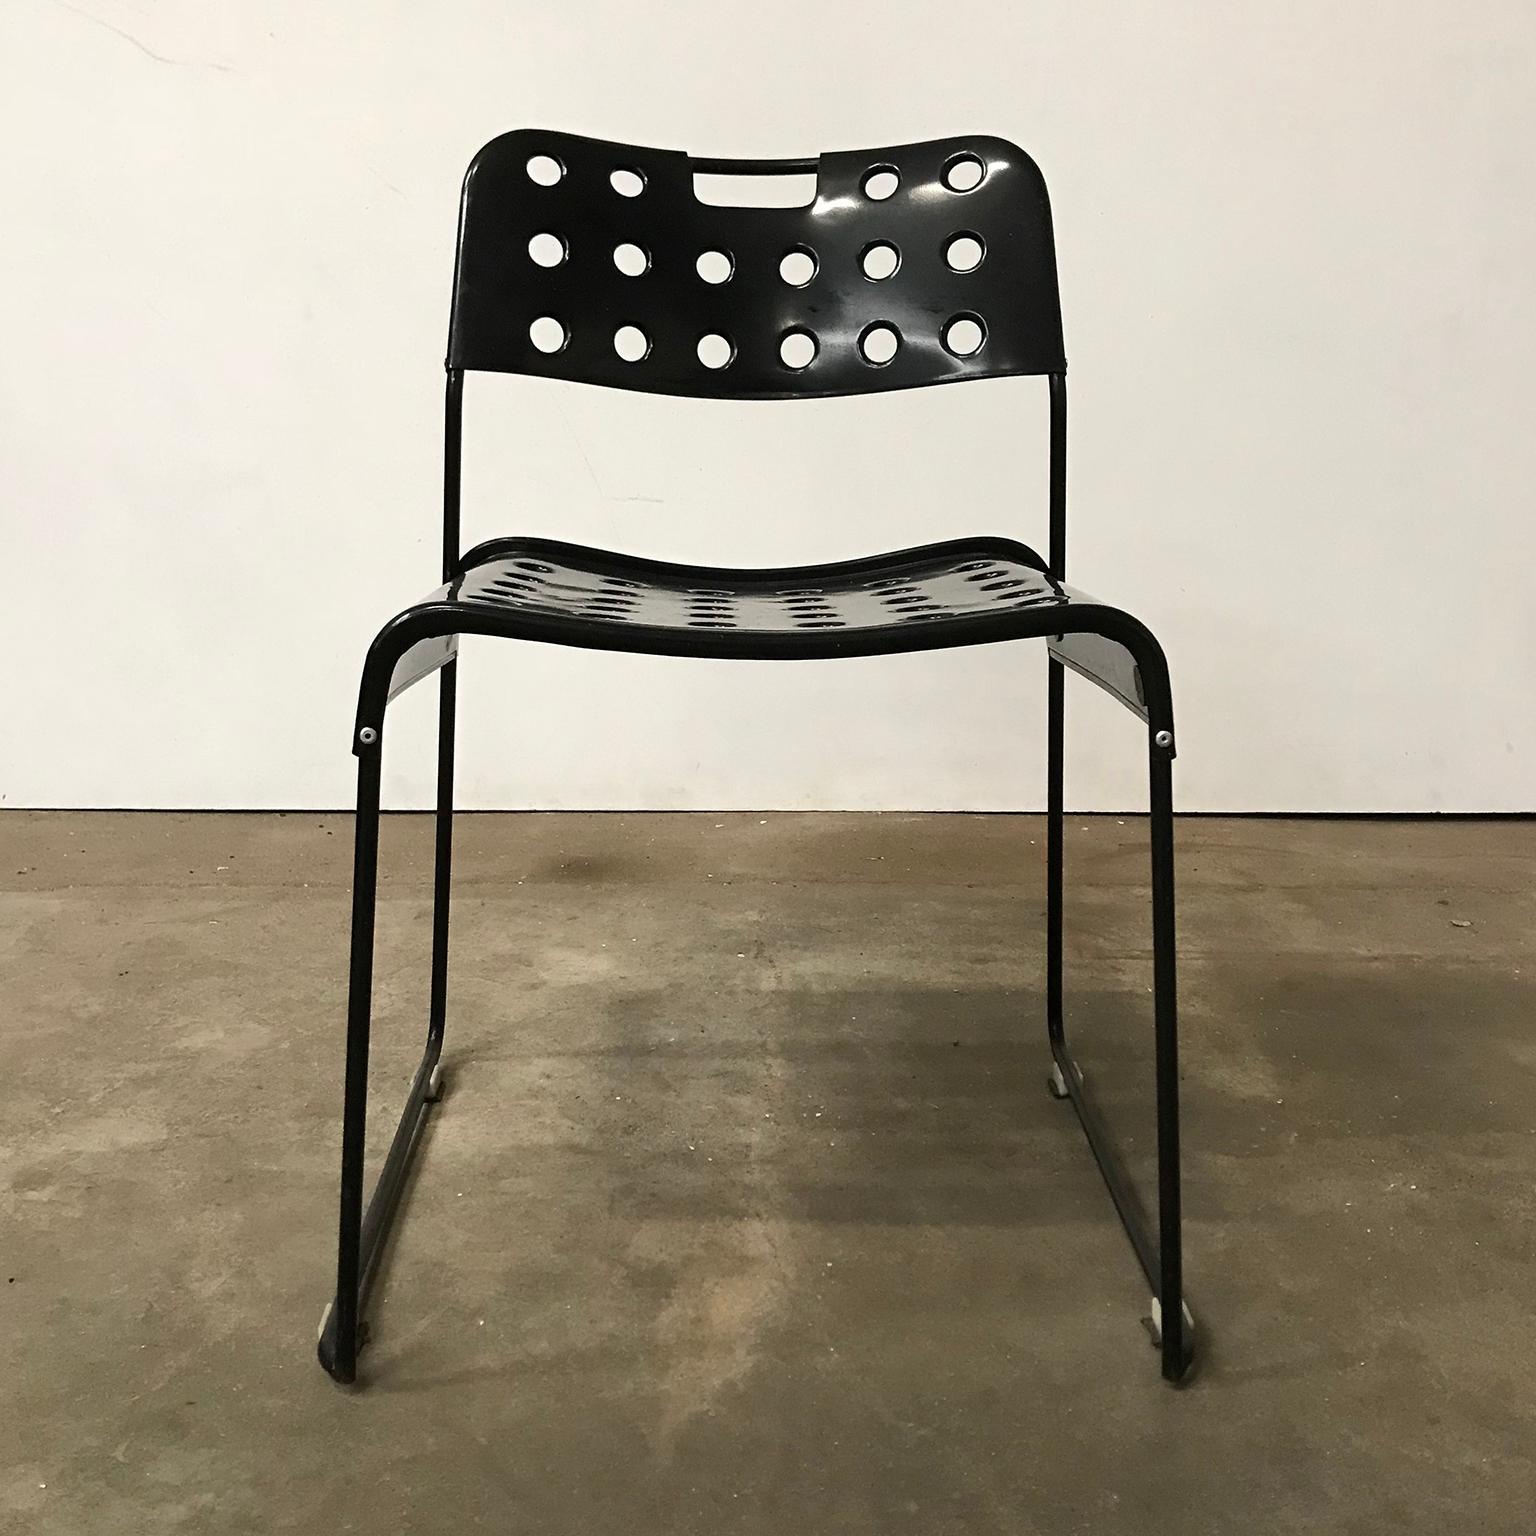 1971, Rodney Kinsman, Set of Rare All Black, Incl. Frame, Omstak Stacking Chairs 1